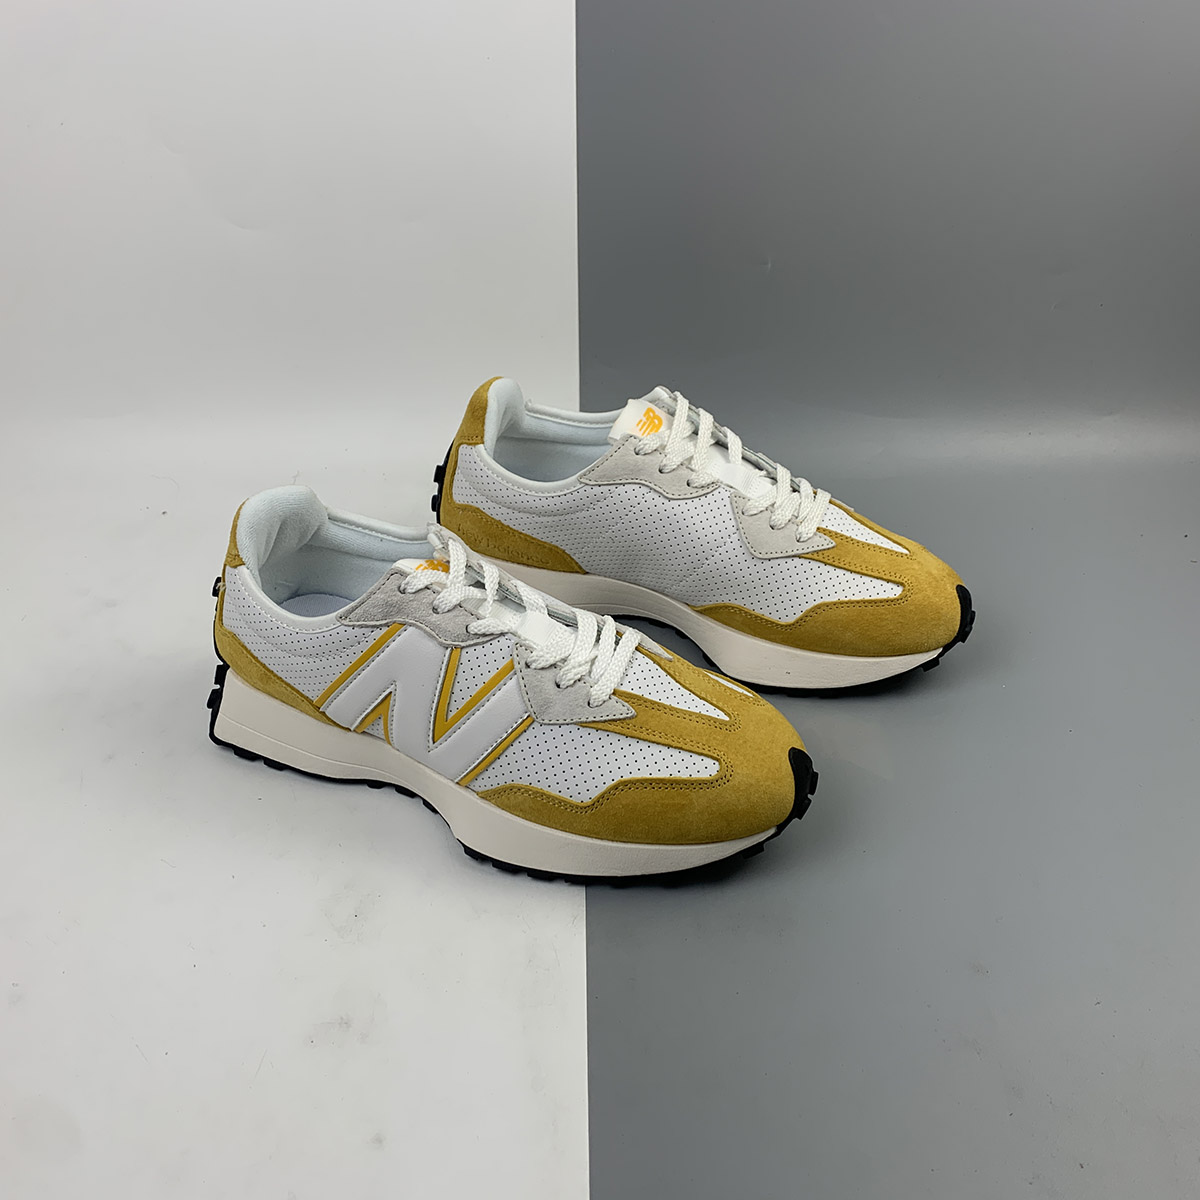 New Balance 327 Perforated Pack Yellow White For Sale – The Sole Line